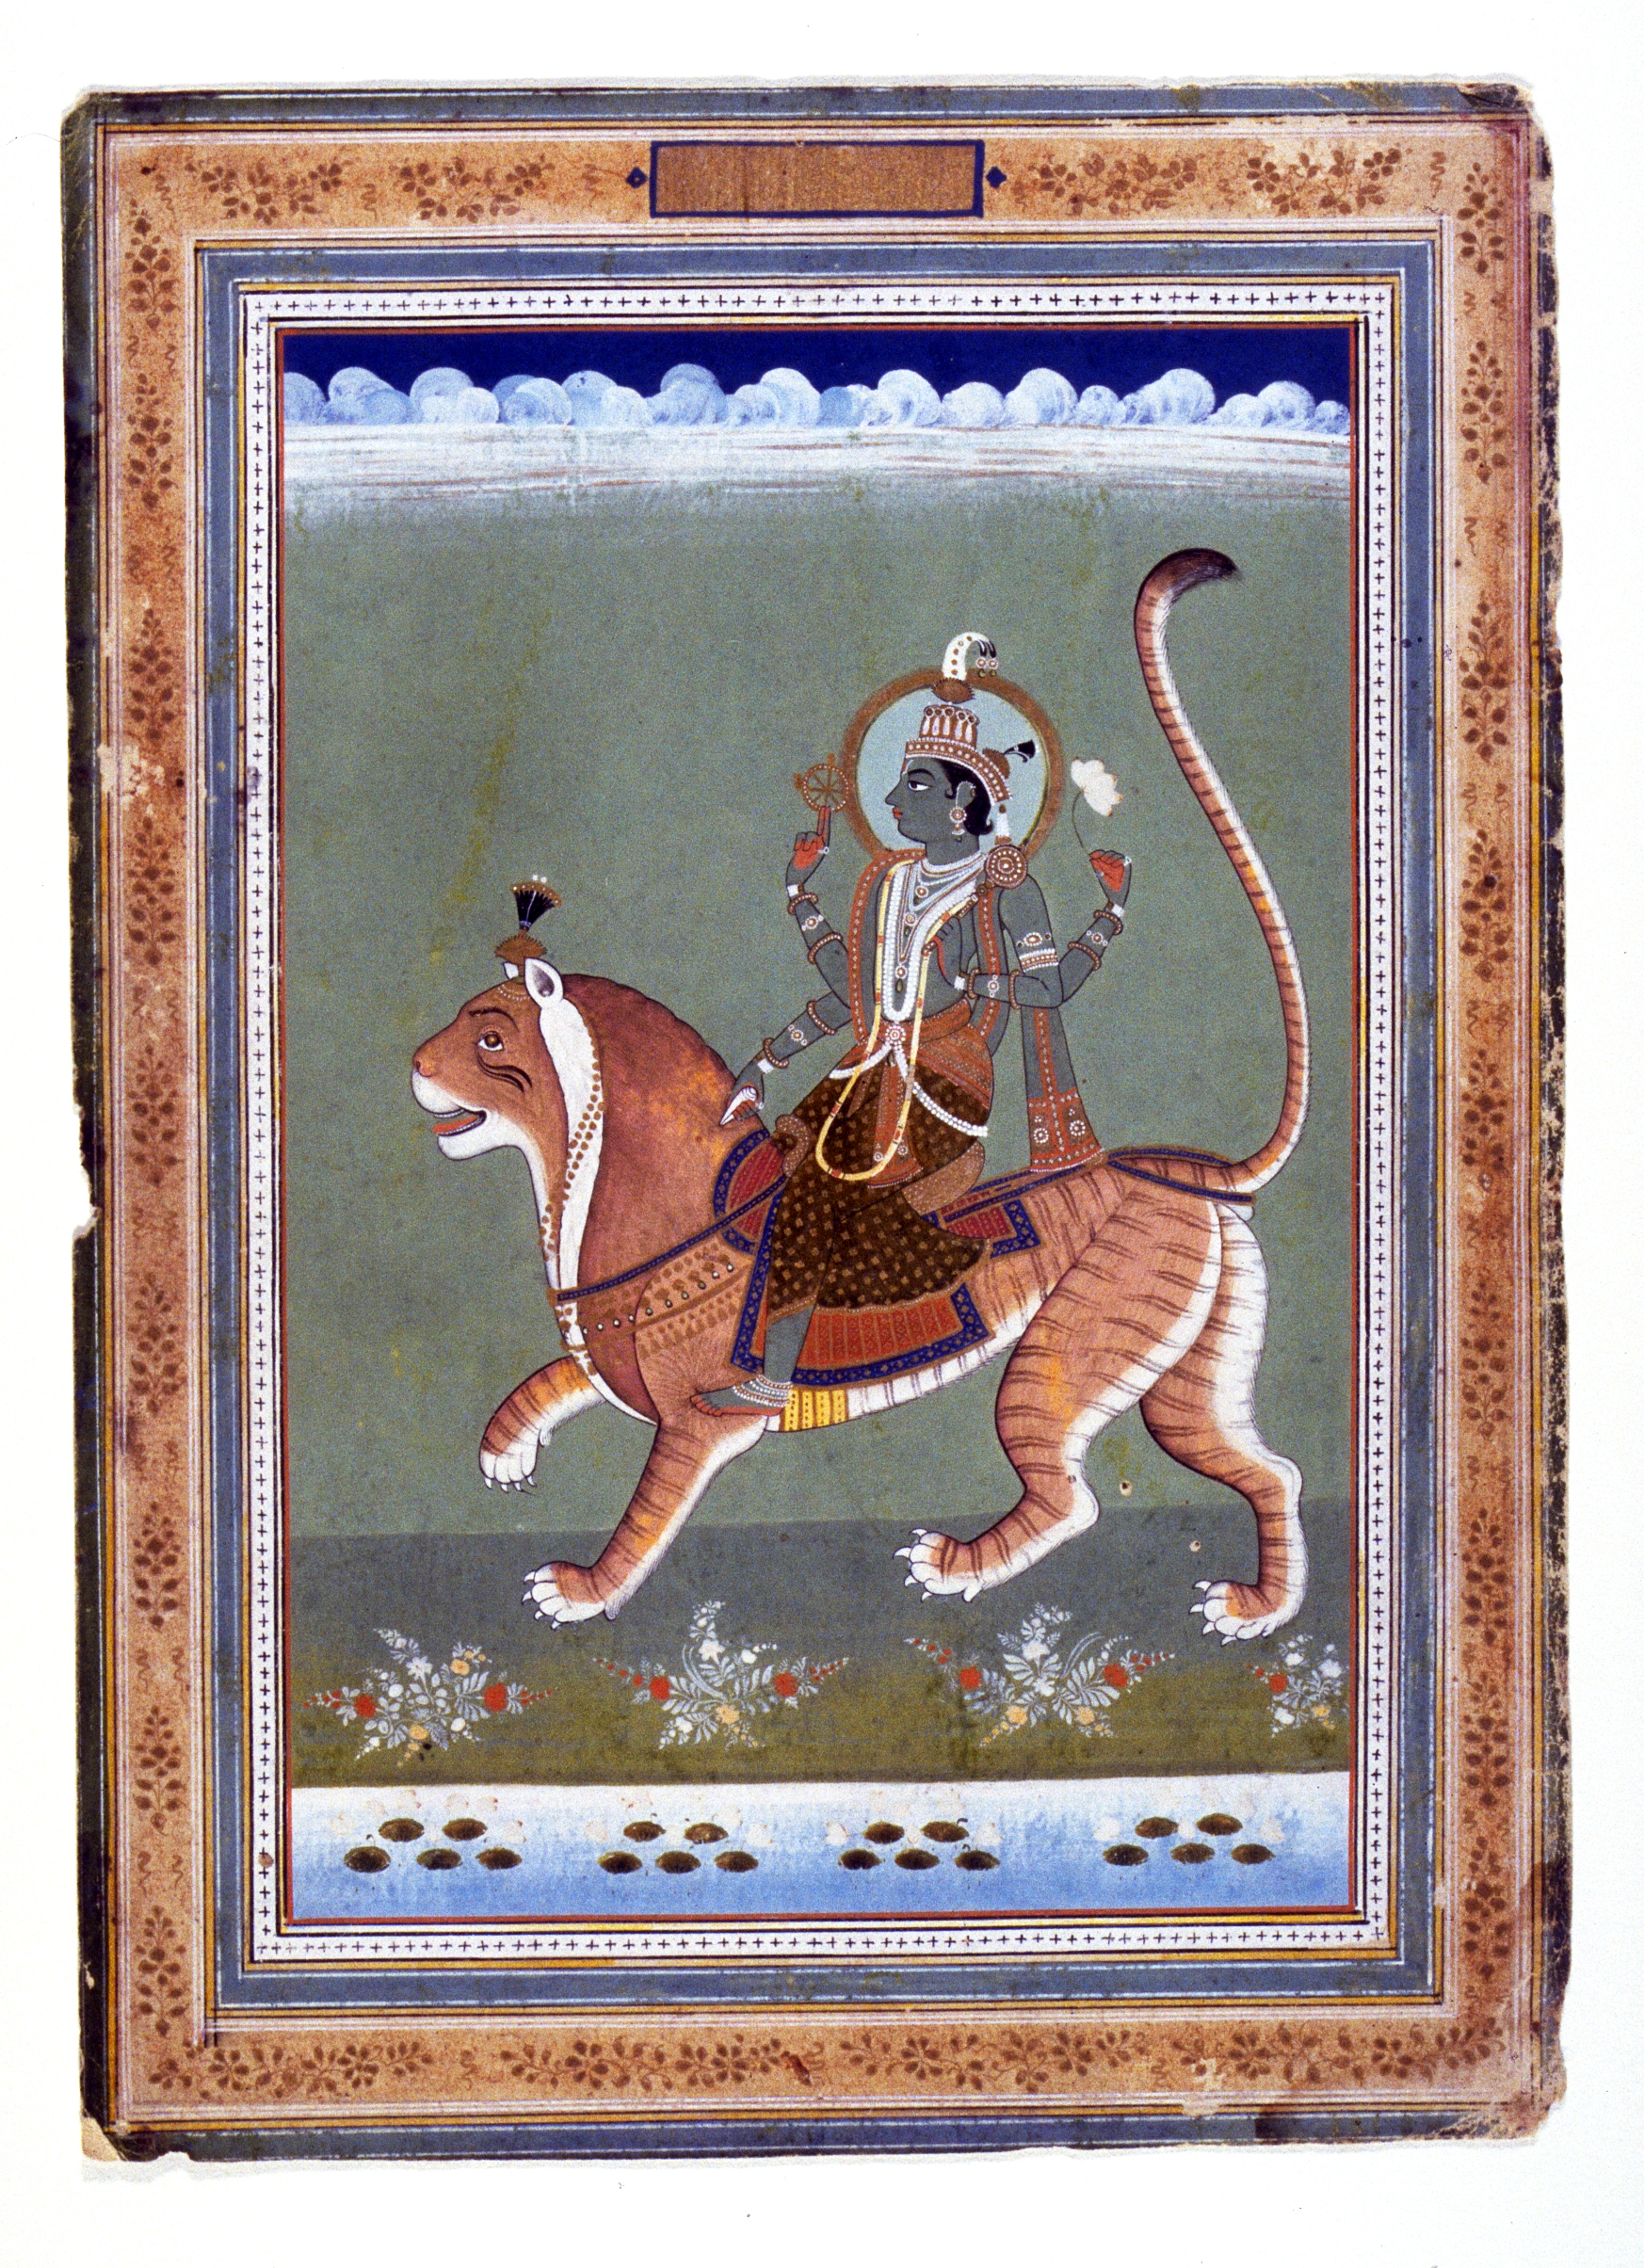 Image 4 Page from an Indian zodiac manuscript, Figure Mounted on a Tiger, possibly Saturn, India, Rajasthan, Jaipur school circa 1840, ink, opaque watercolor and gold on paper